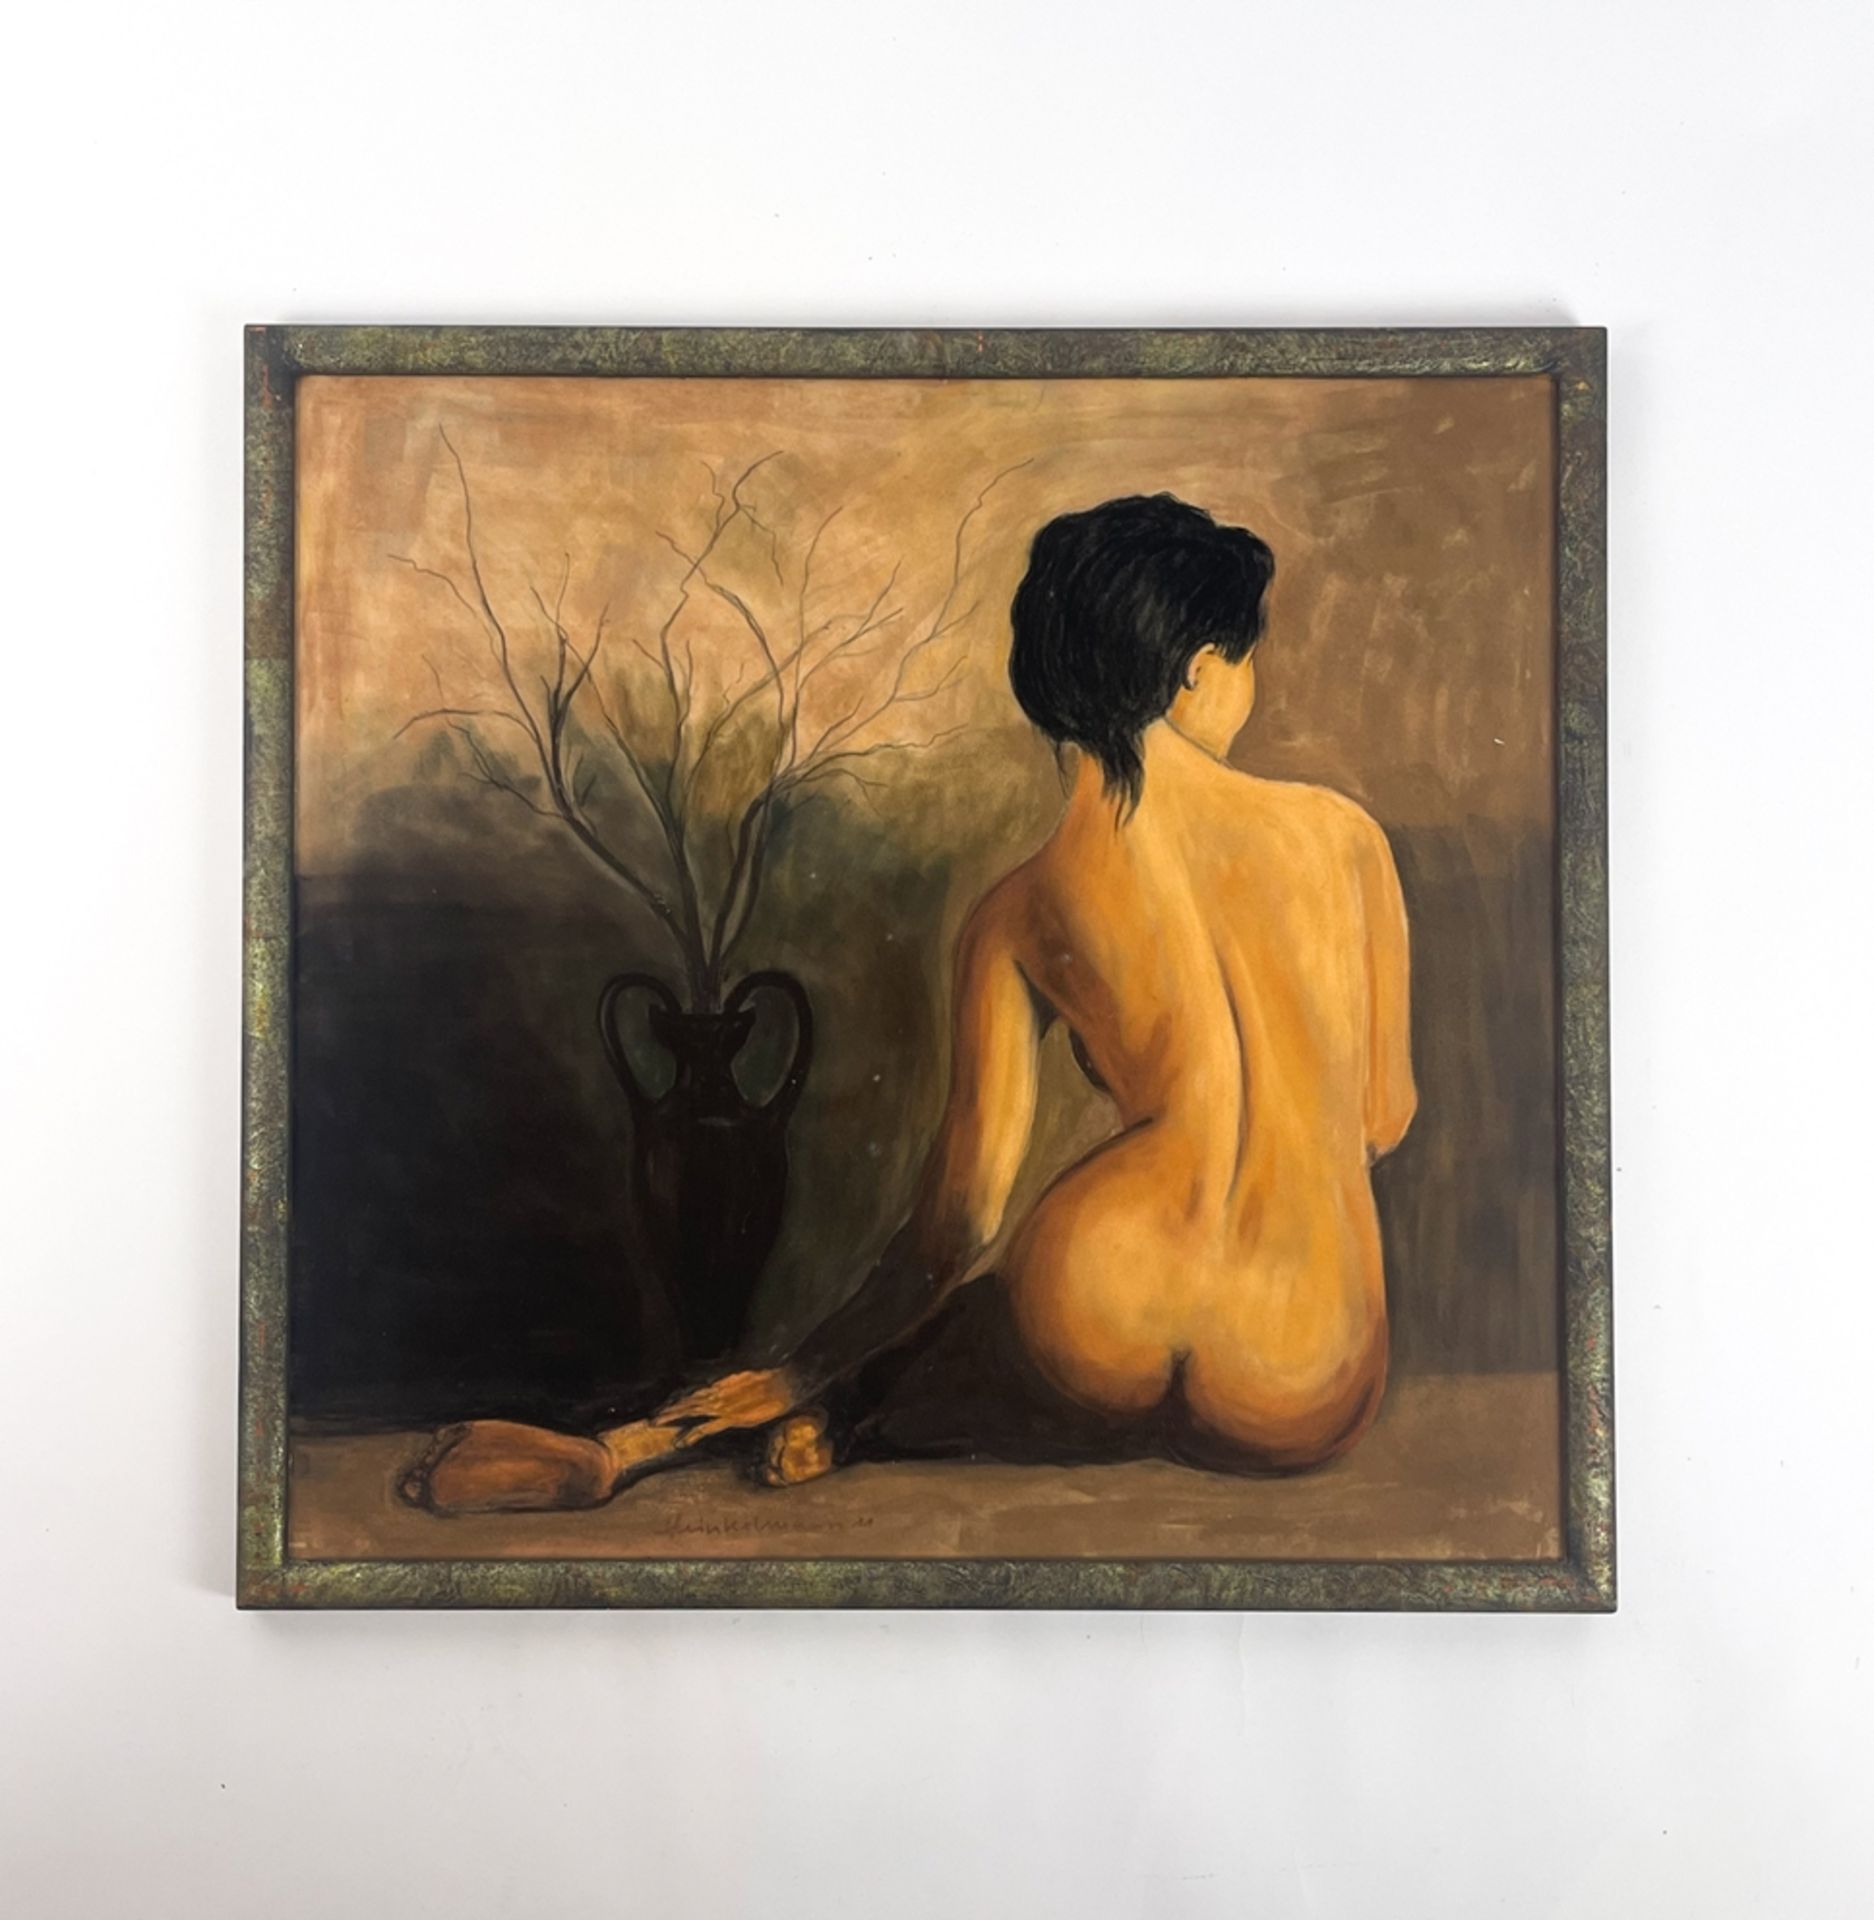 Painting backview of a woman